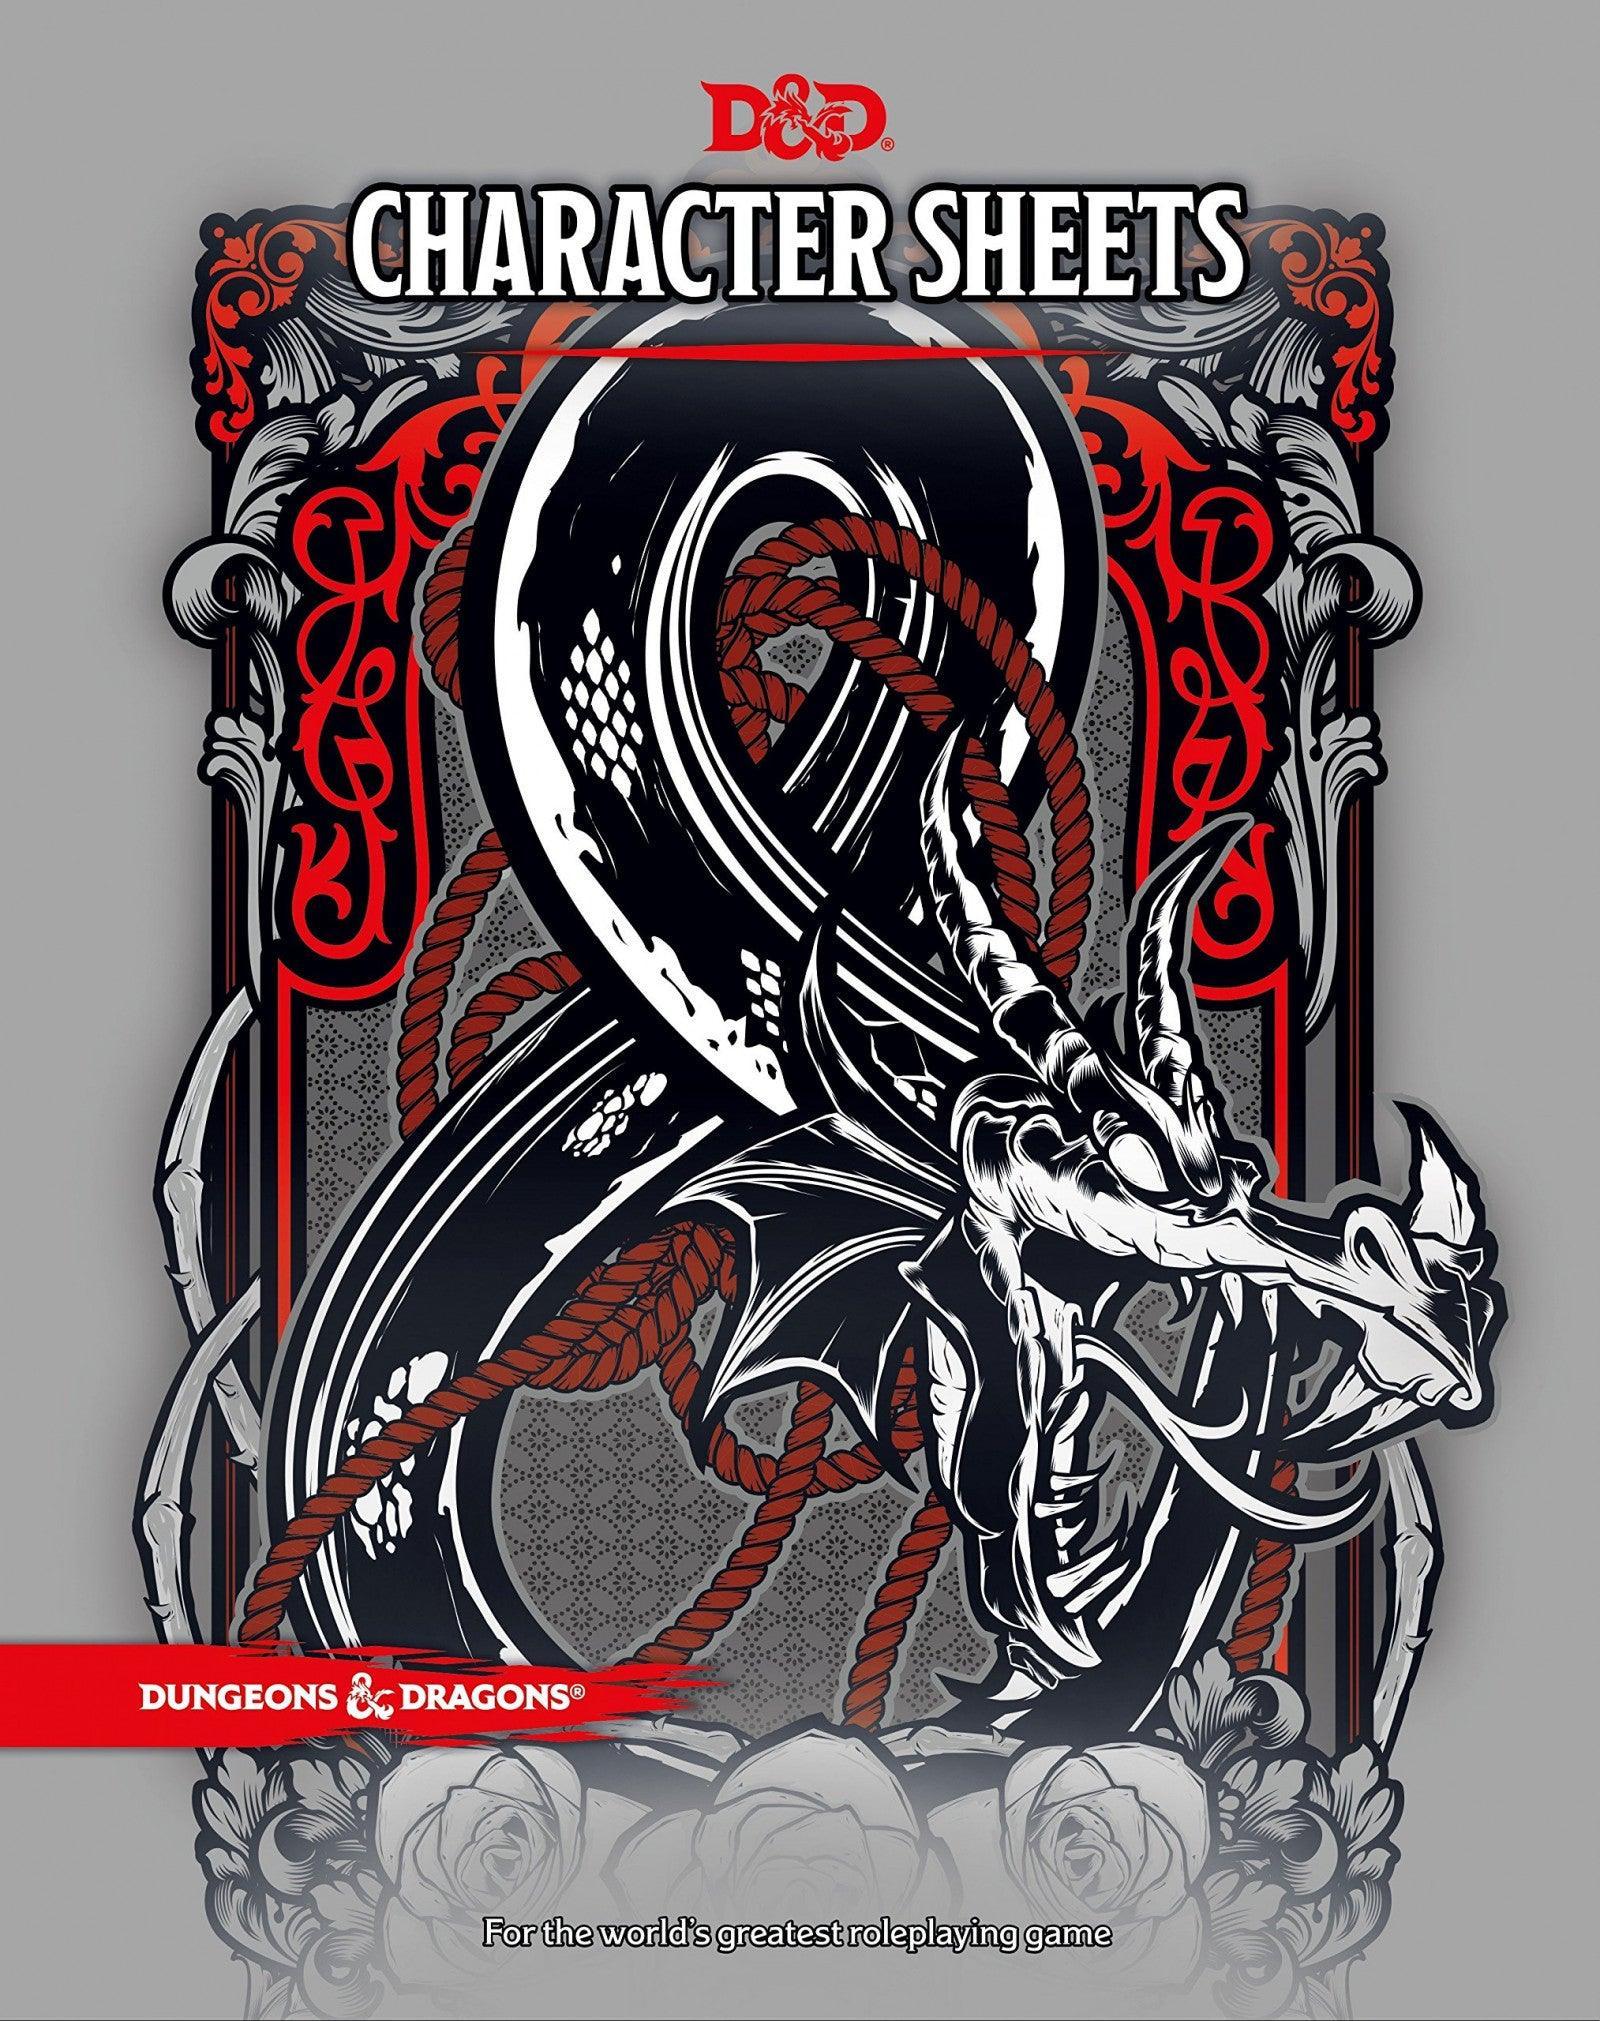 VR-87494 D&D Dungeons & Dragons Character Sheets - Wizards of the Coast - Titan Pop Culture